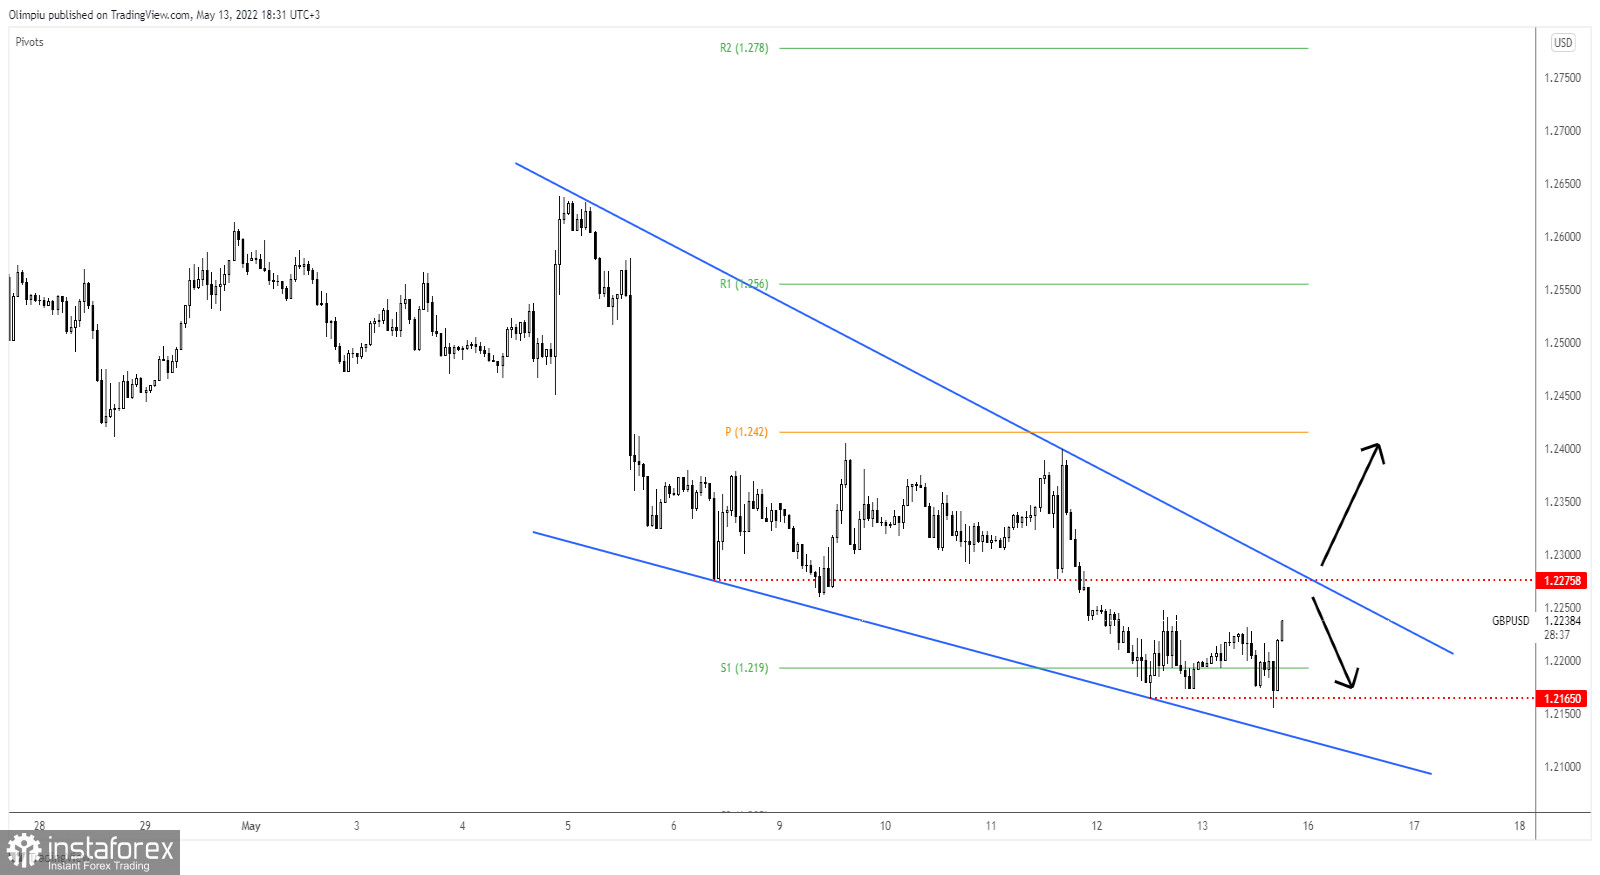 GBP/USD lifted by poor US data, falling wedge in play